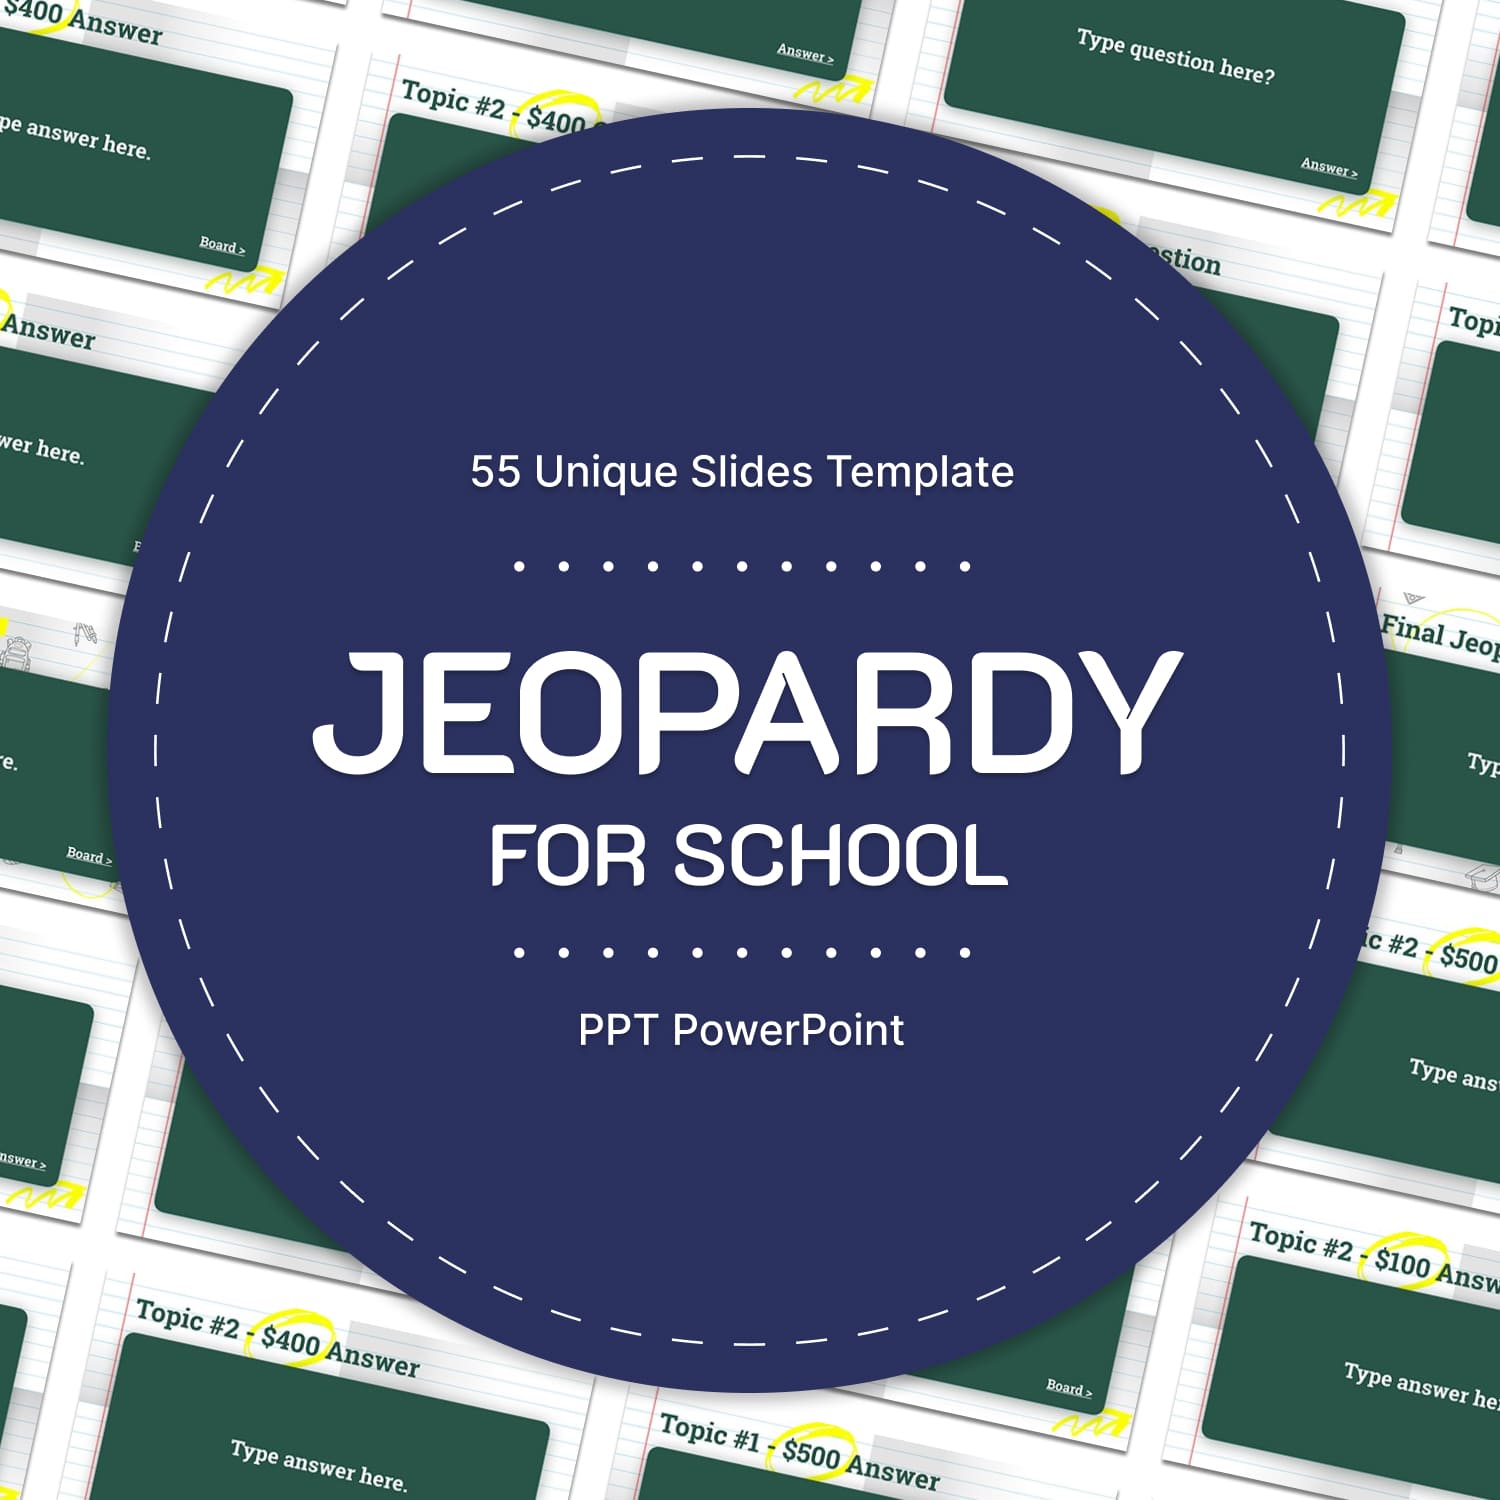 55 unique slides template of Jeopardy for school.